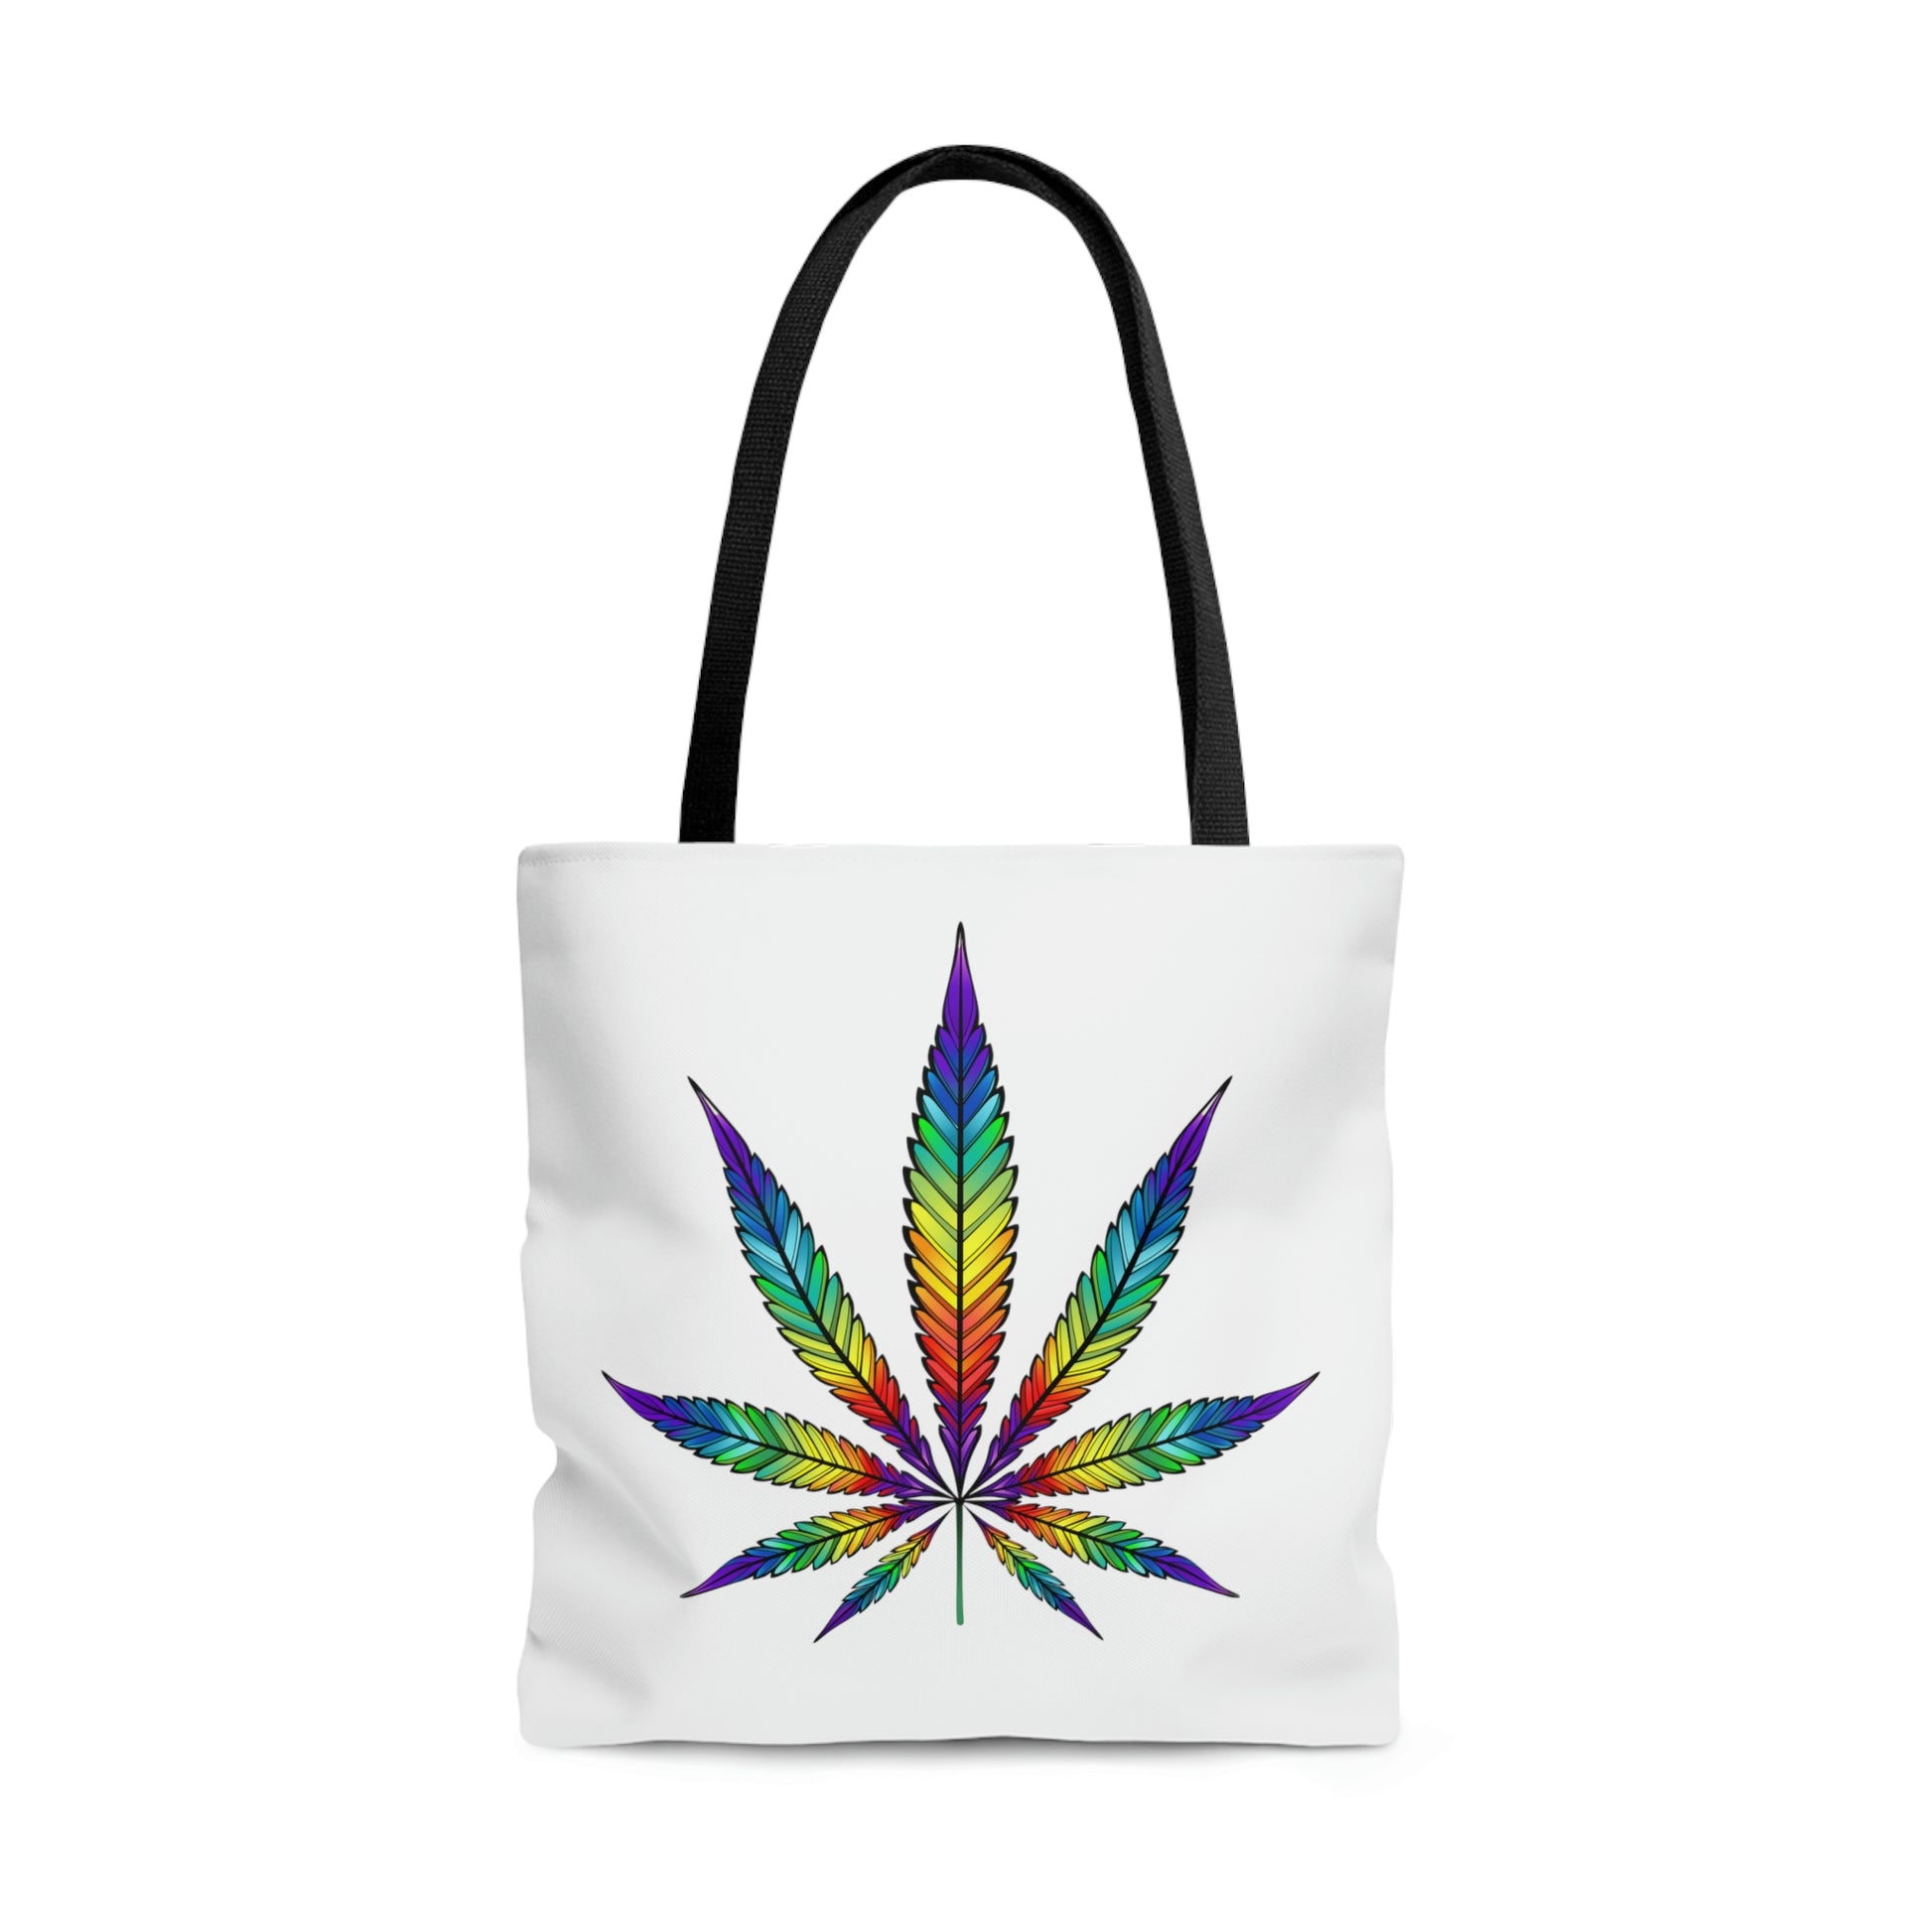 A nice white Colorful Rainbow Tote Bag with brilliant rainbow marijuana leaf graphic placed right in the center for an awesome view of the design